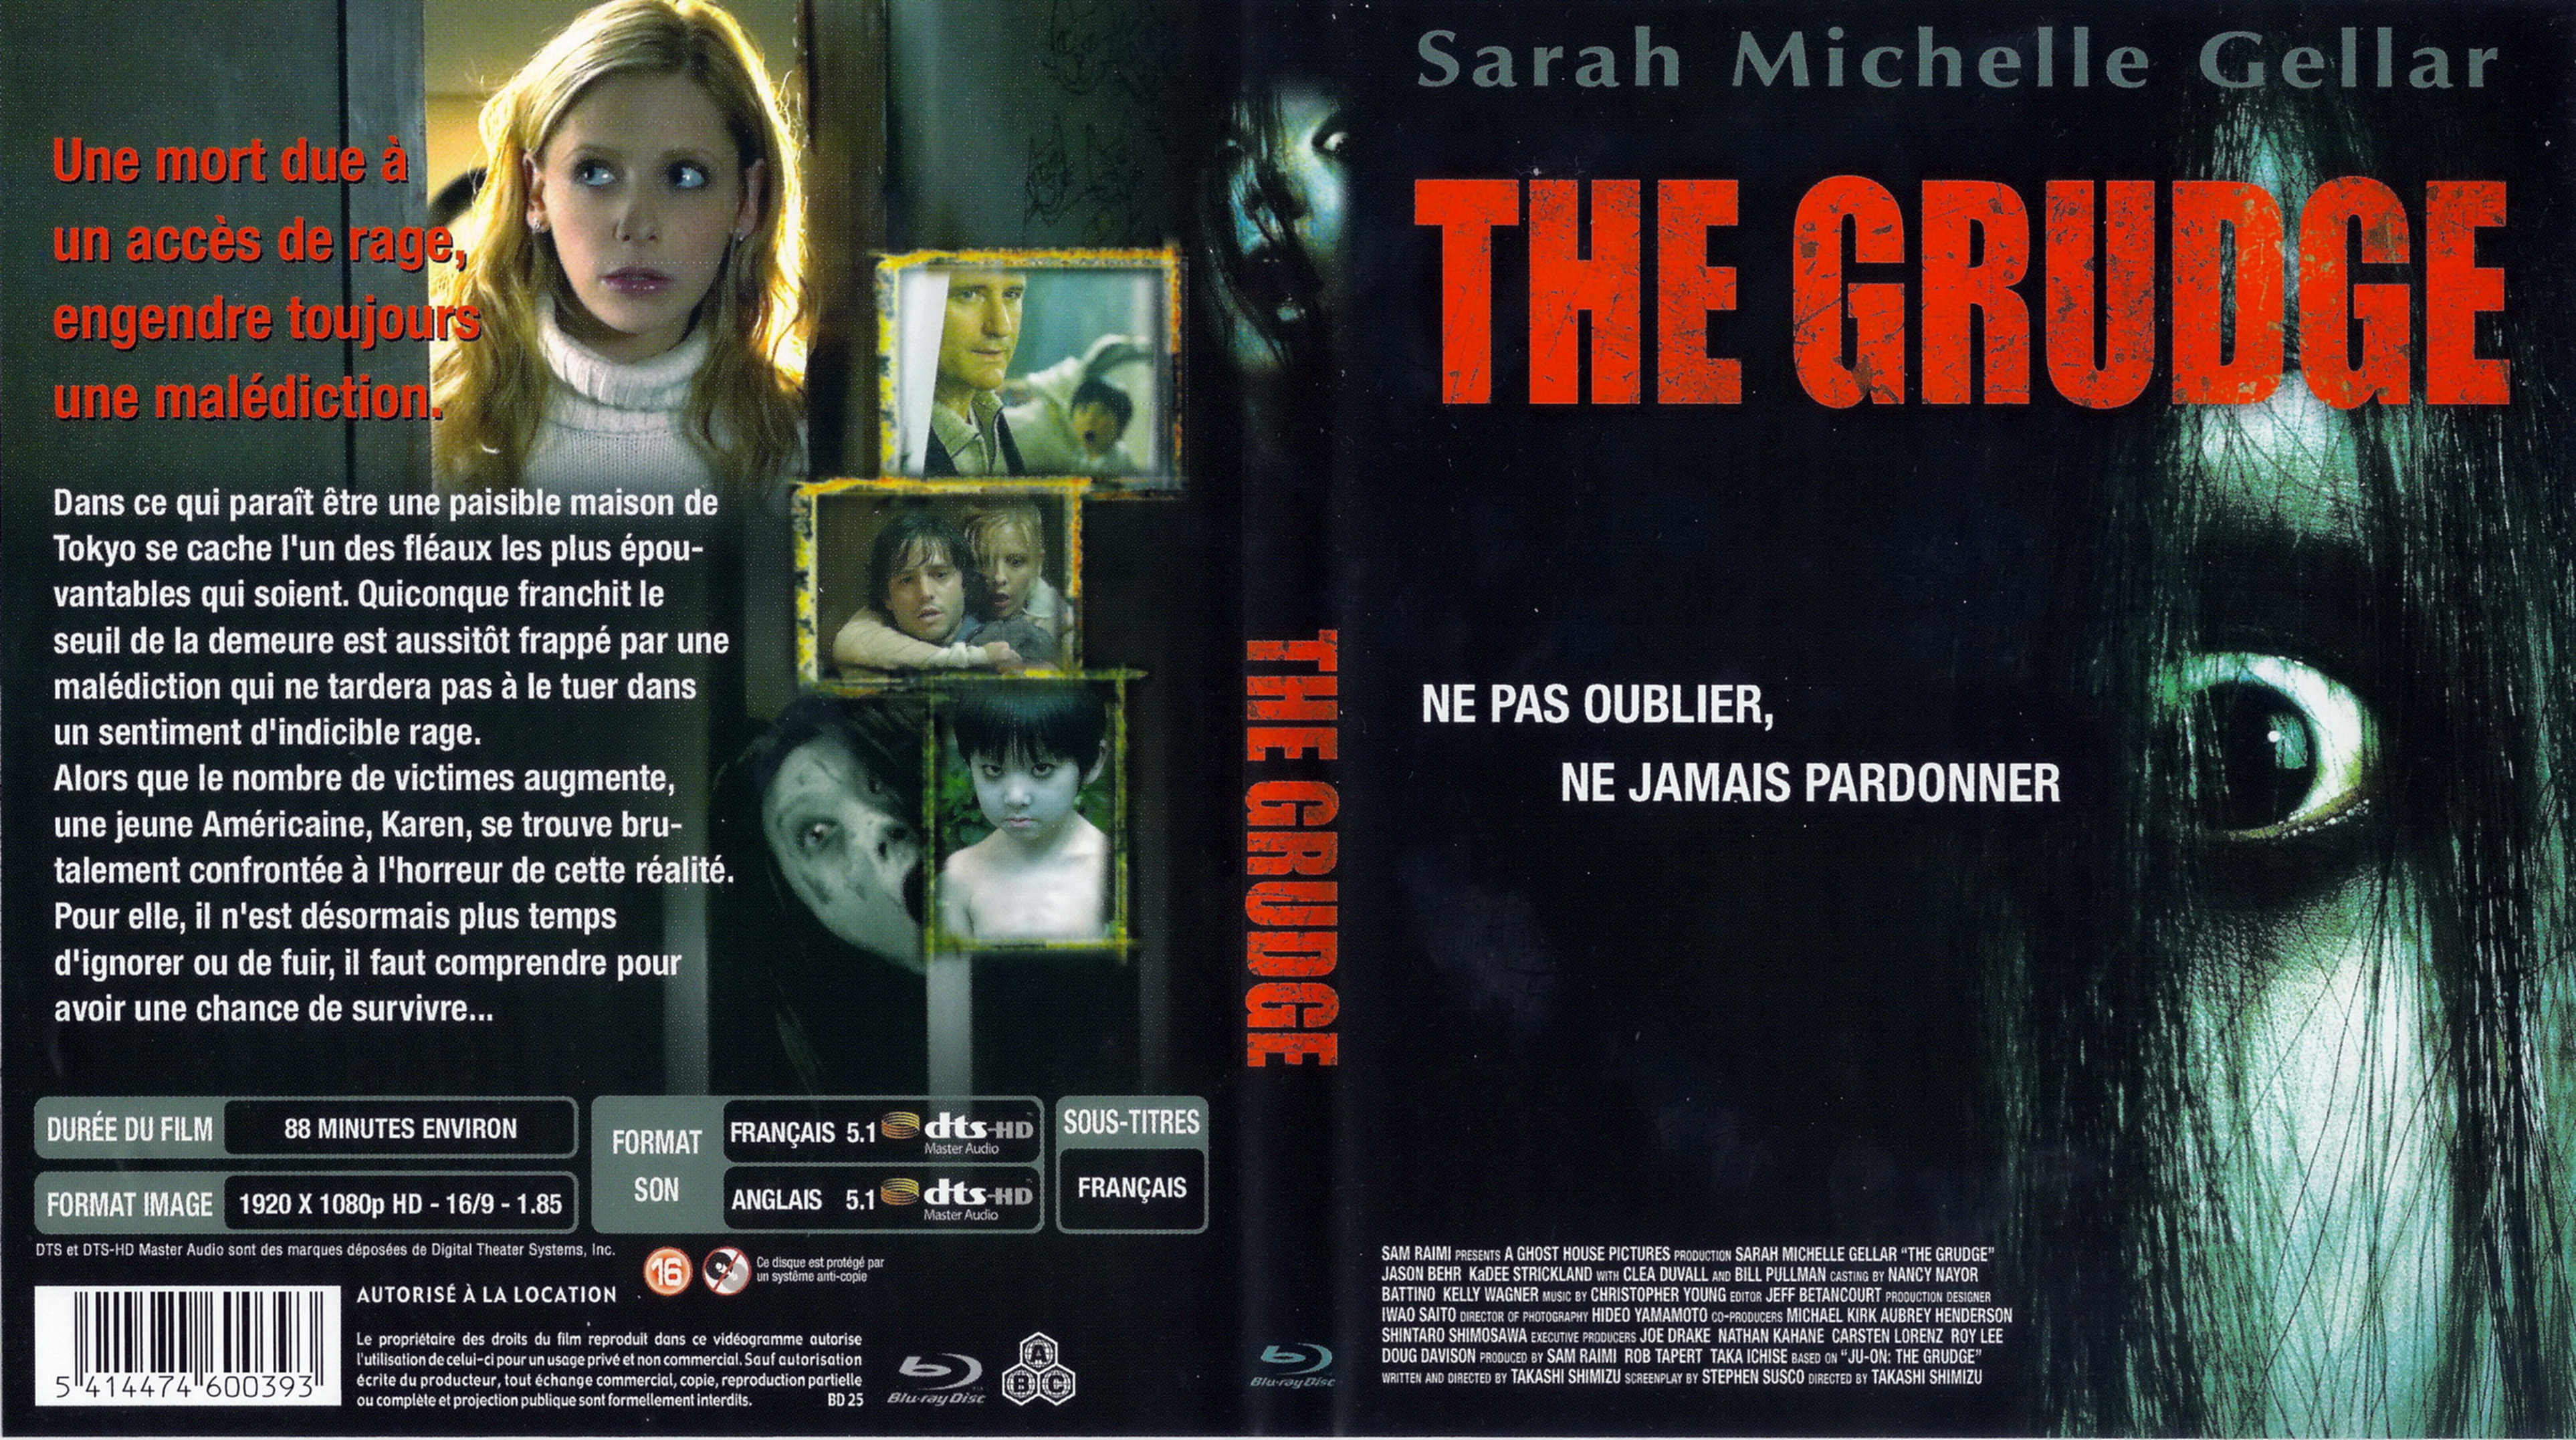 Jaquette DVD The grudge (BLU-RAY)